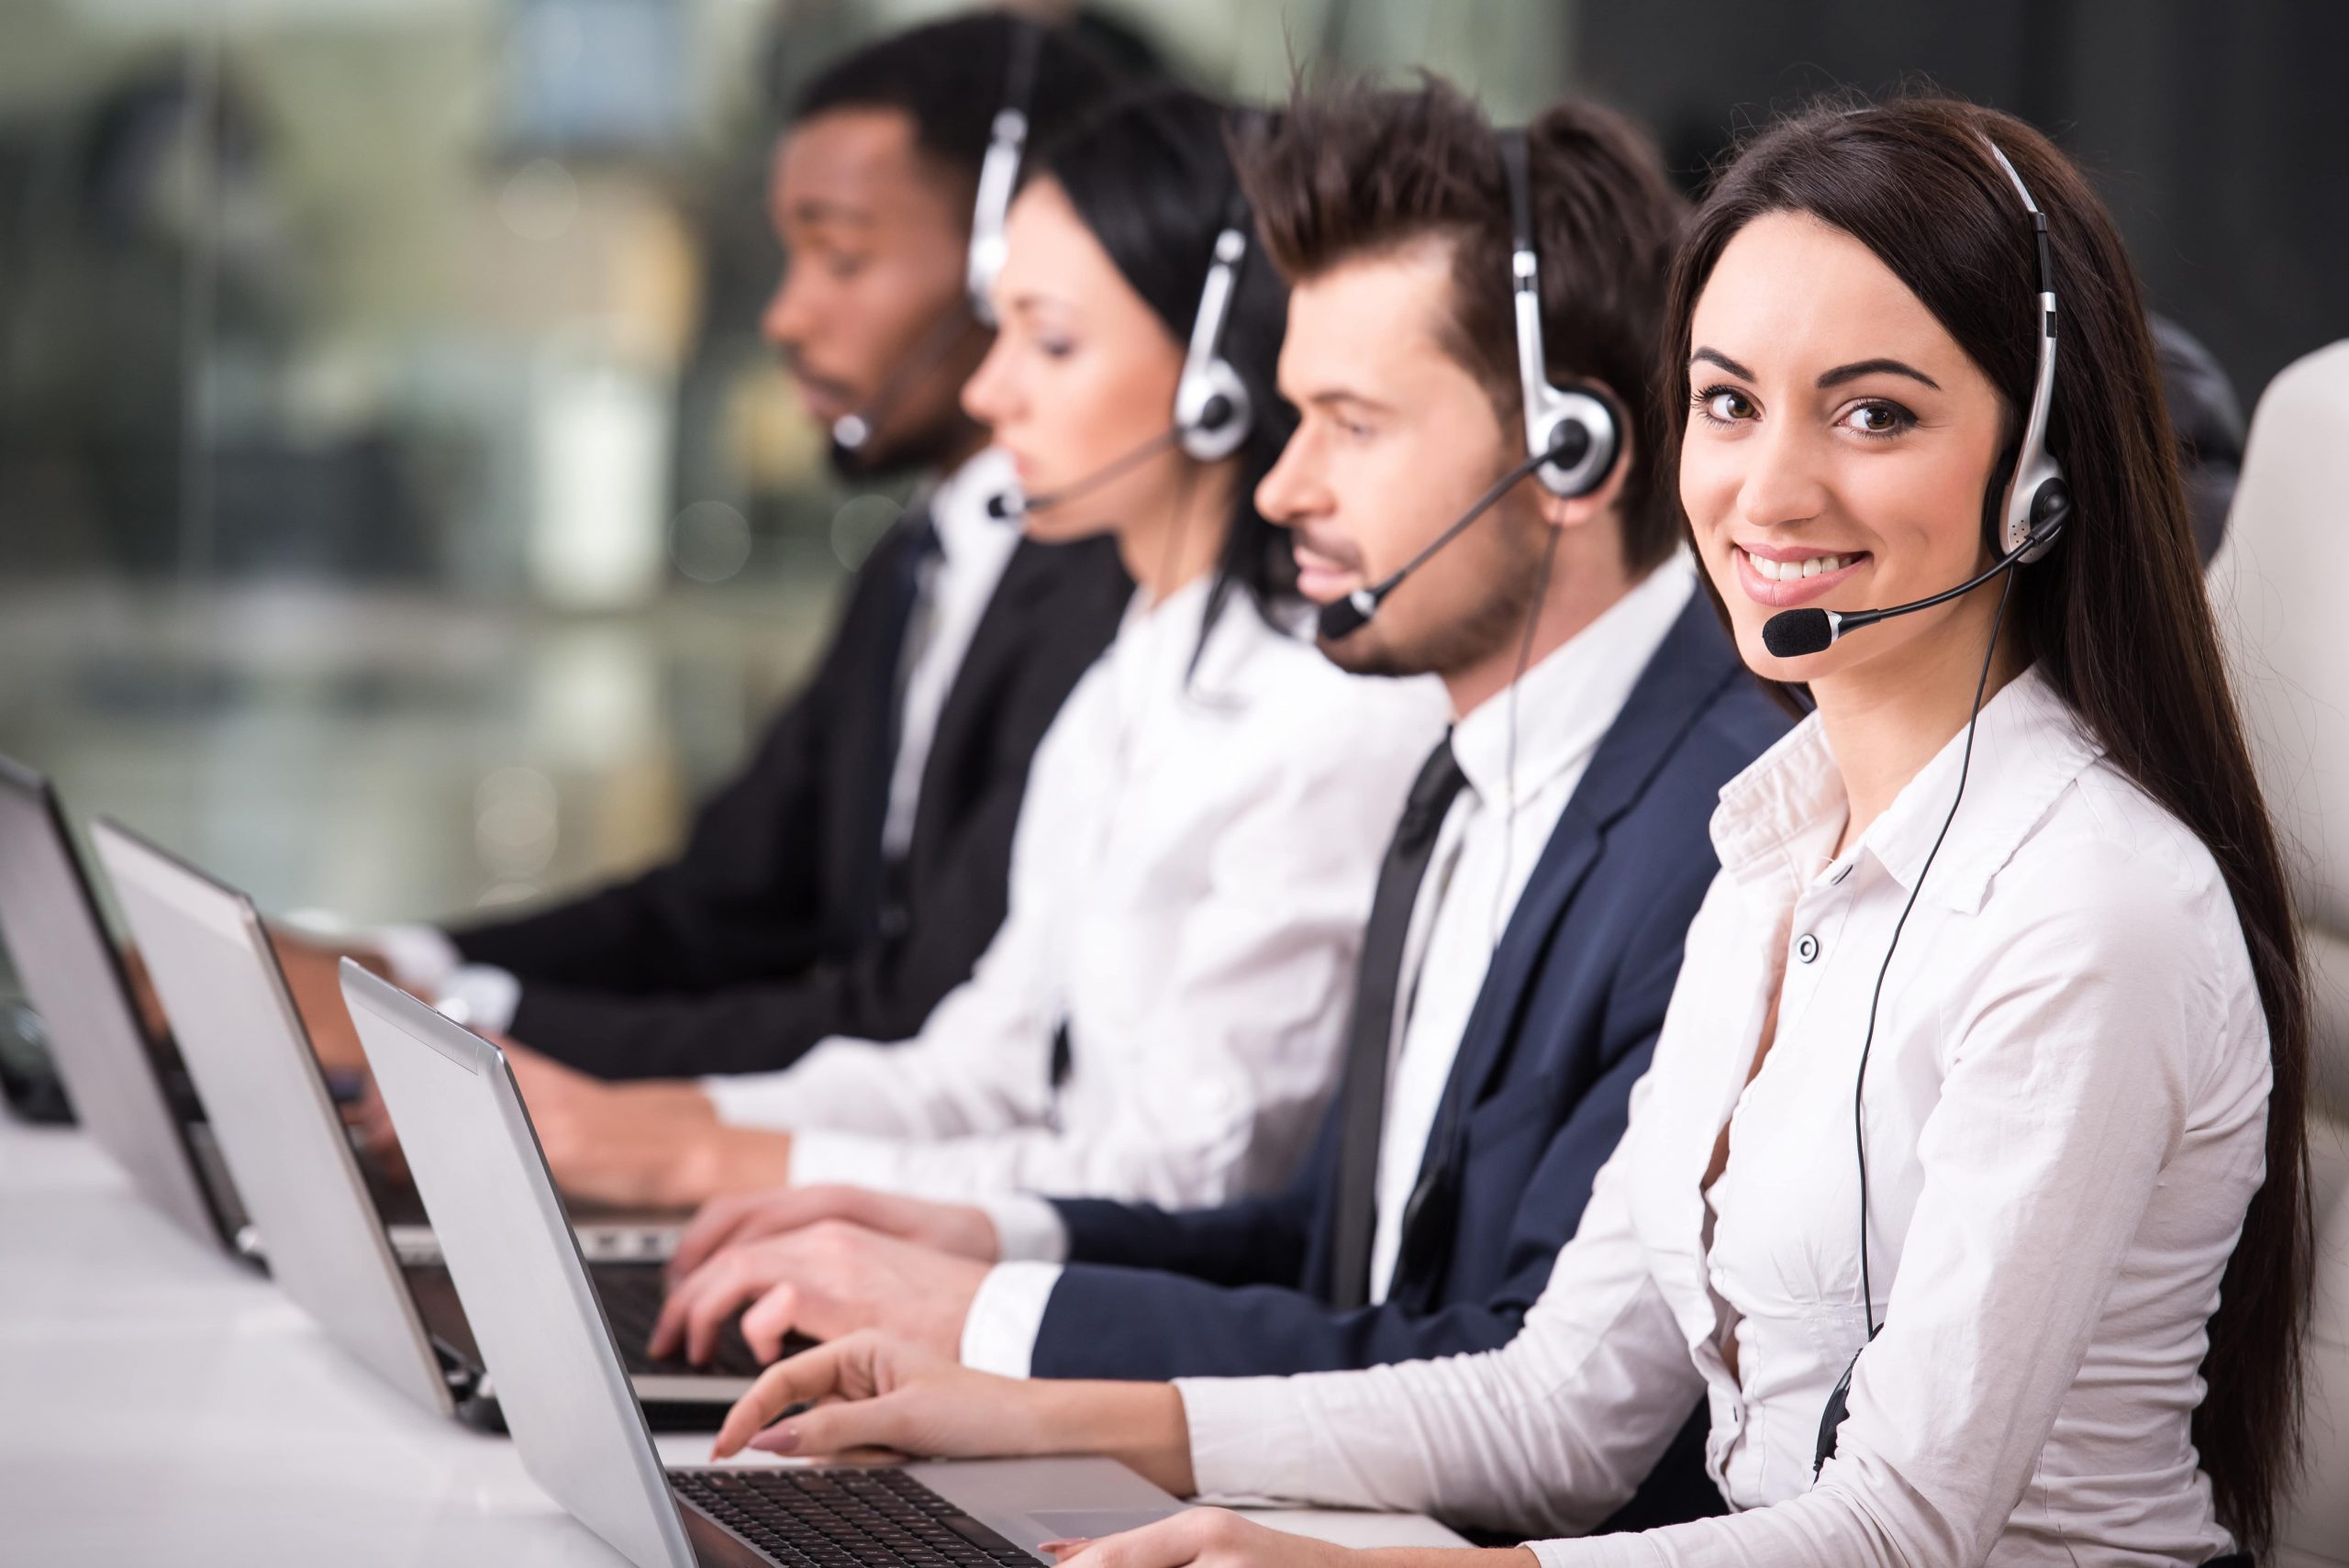 Digital Transformation of Contact Centers